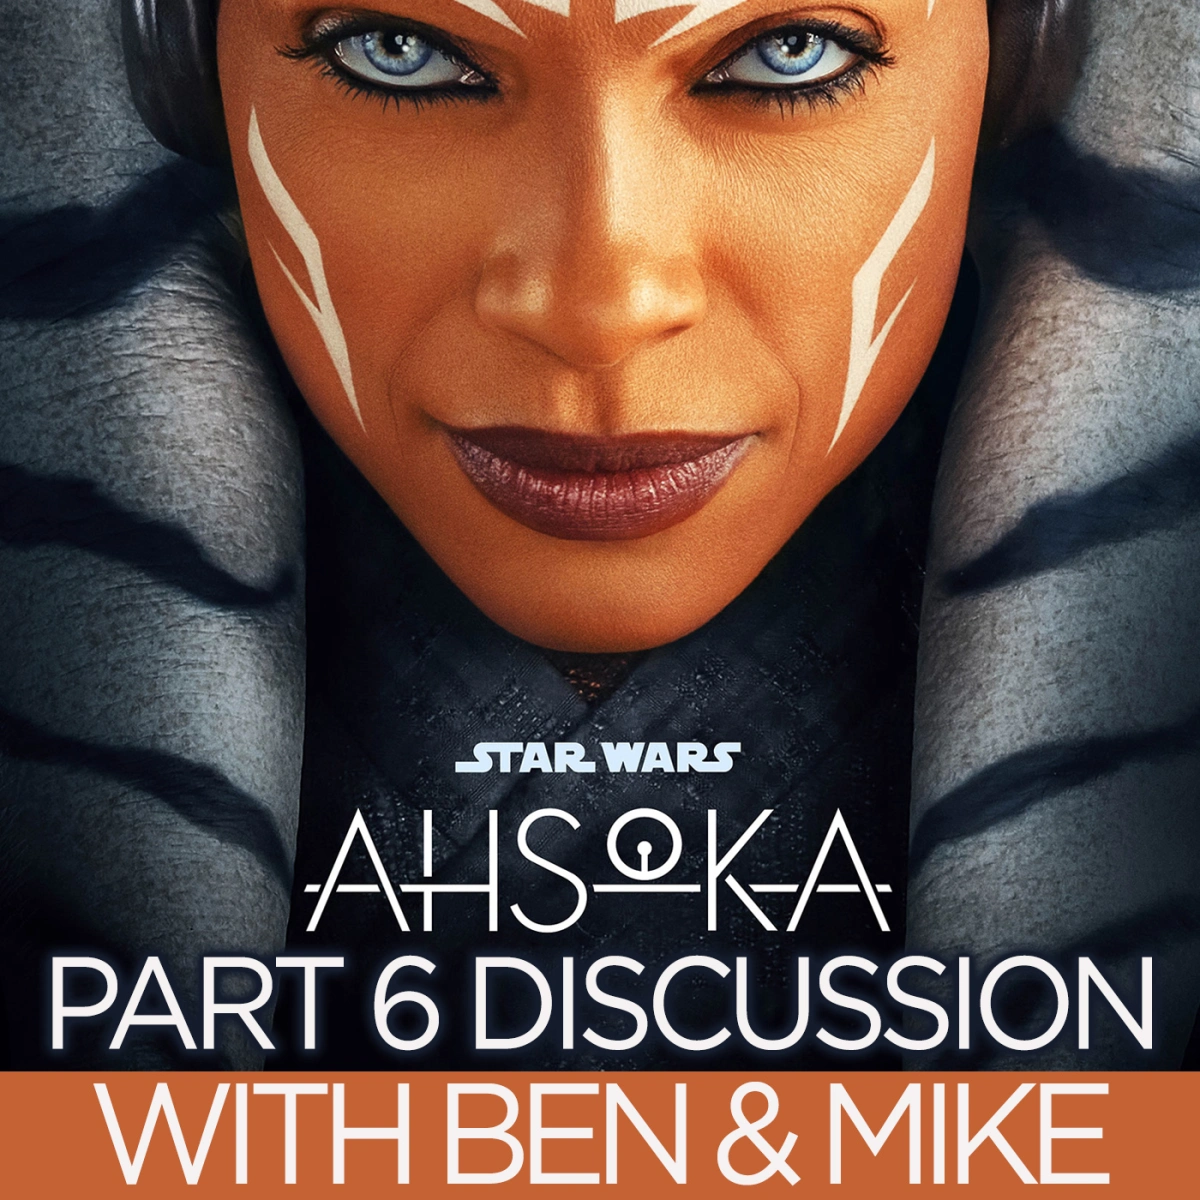 Ahsoka Part 6 Far Far Away: What Is The Point Of These Characters & Where Is The Show Going? Plus A Lacklustre Reunion & More, With Ben Of Star Wars Timeline & Mike